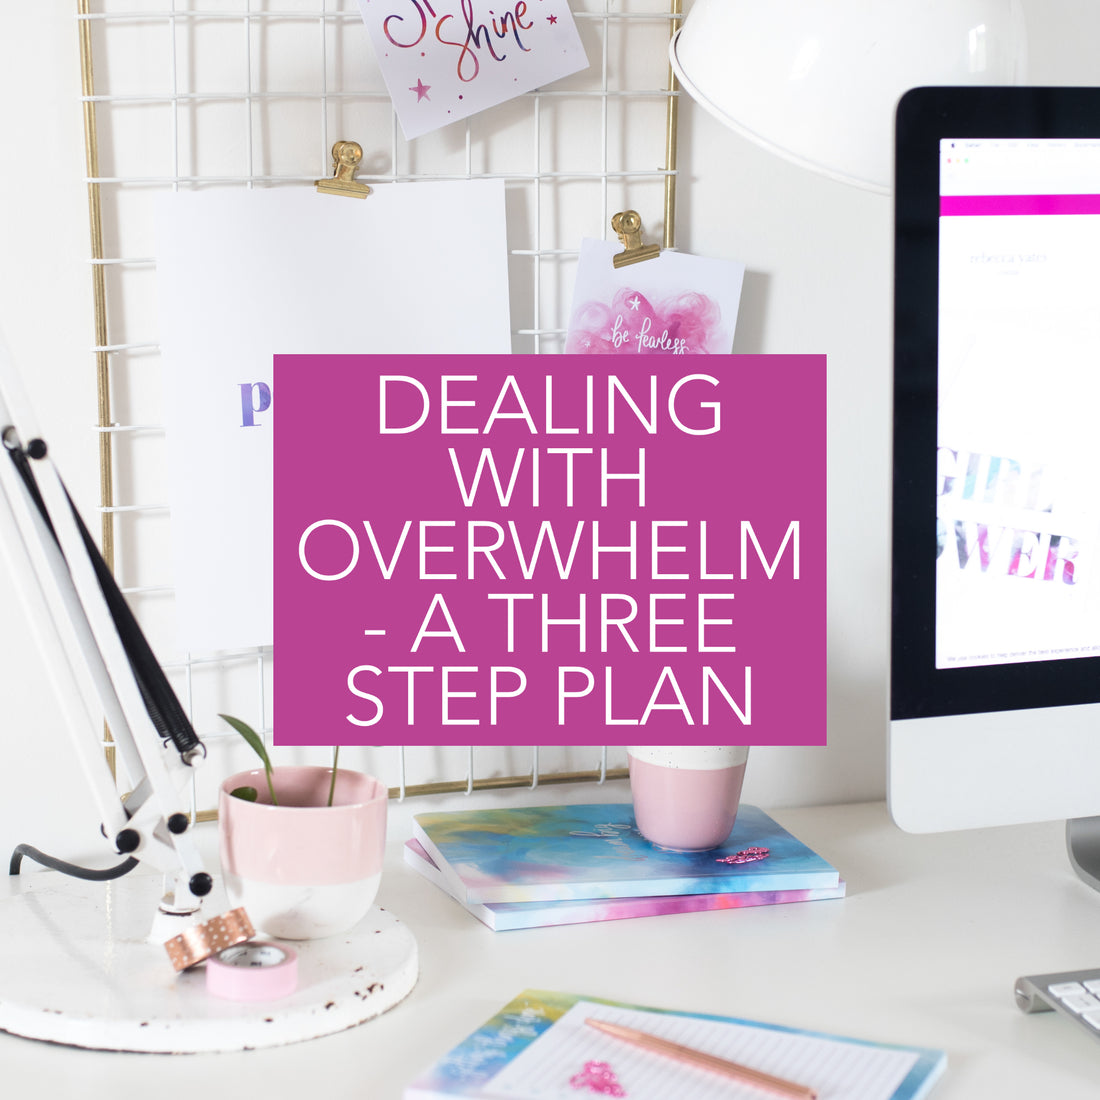 BANISHING OVERWHELM - 3 STEPS TO GETTING BACK ON TRACK